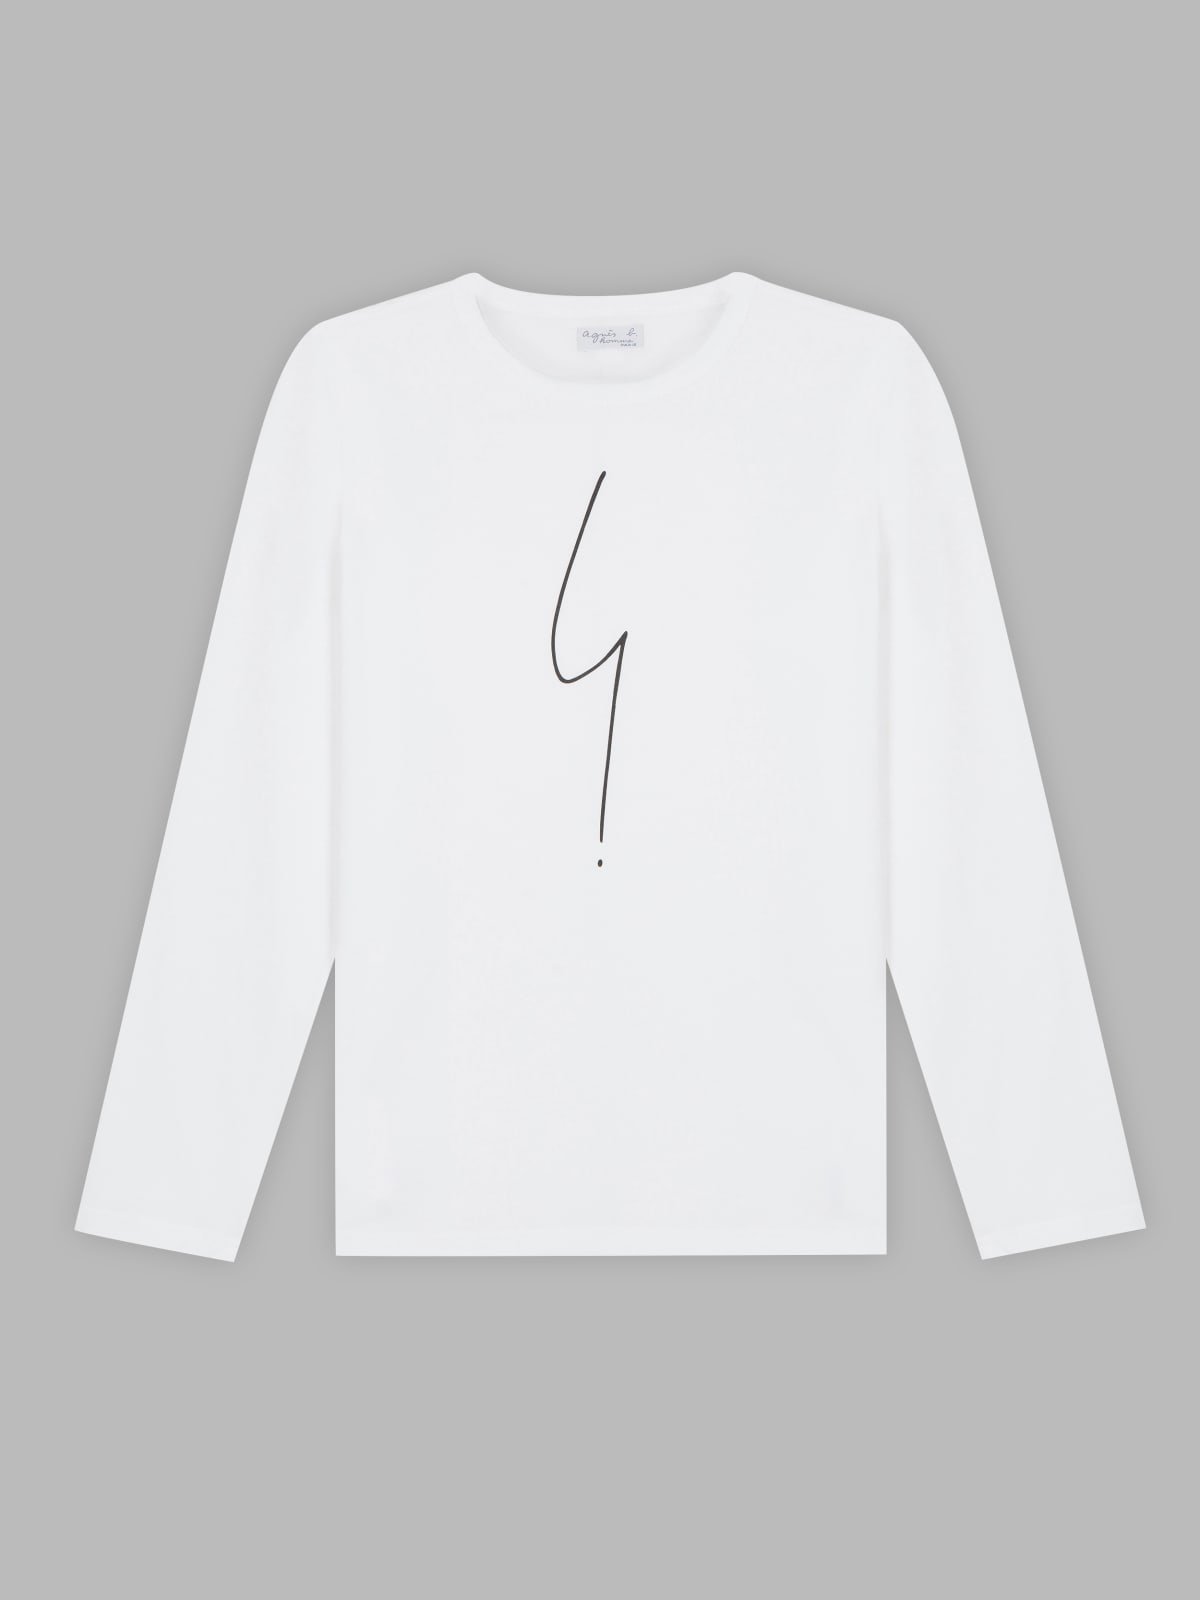 white long sleeves Coulos "irony mark" t-shirt